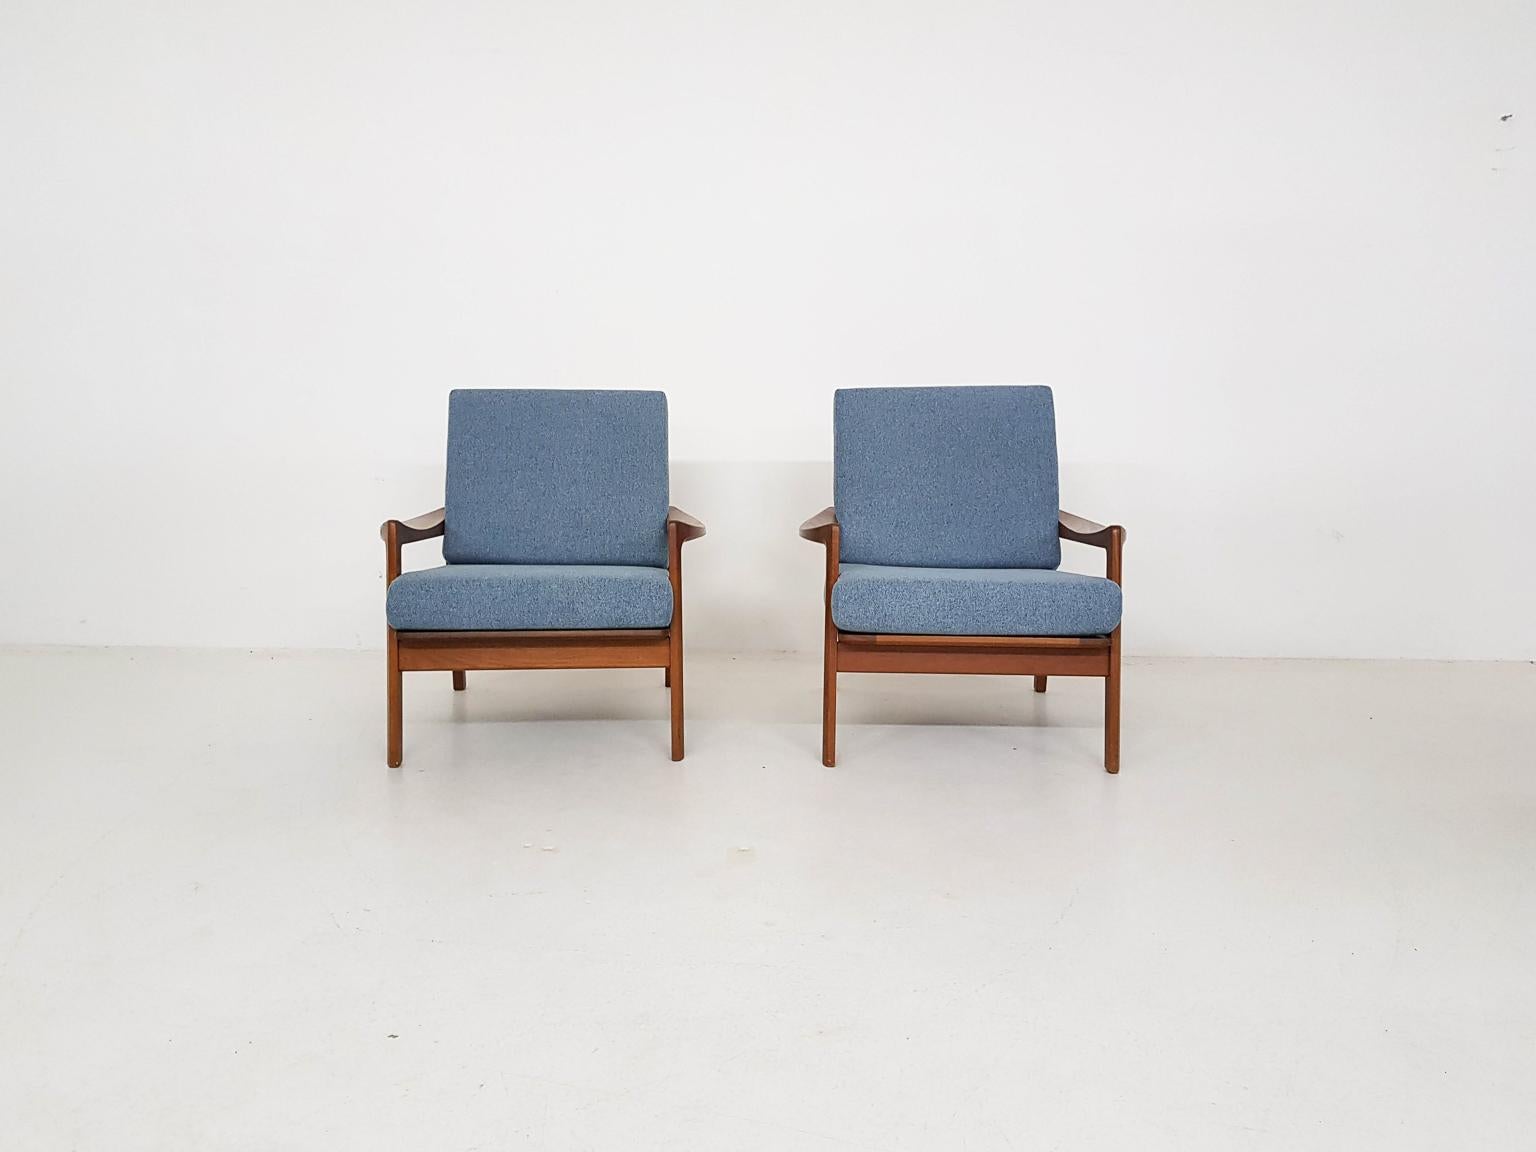 Lovely set of midcentury Danish lounge chairs in teak. Made in the 1960s.

The lounge or arm chairs are well crafted with nice details. The curved teak arm rests feel very organic and have nice finished soft edges. These chairs are true to the